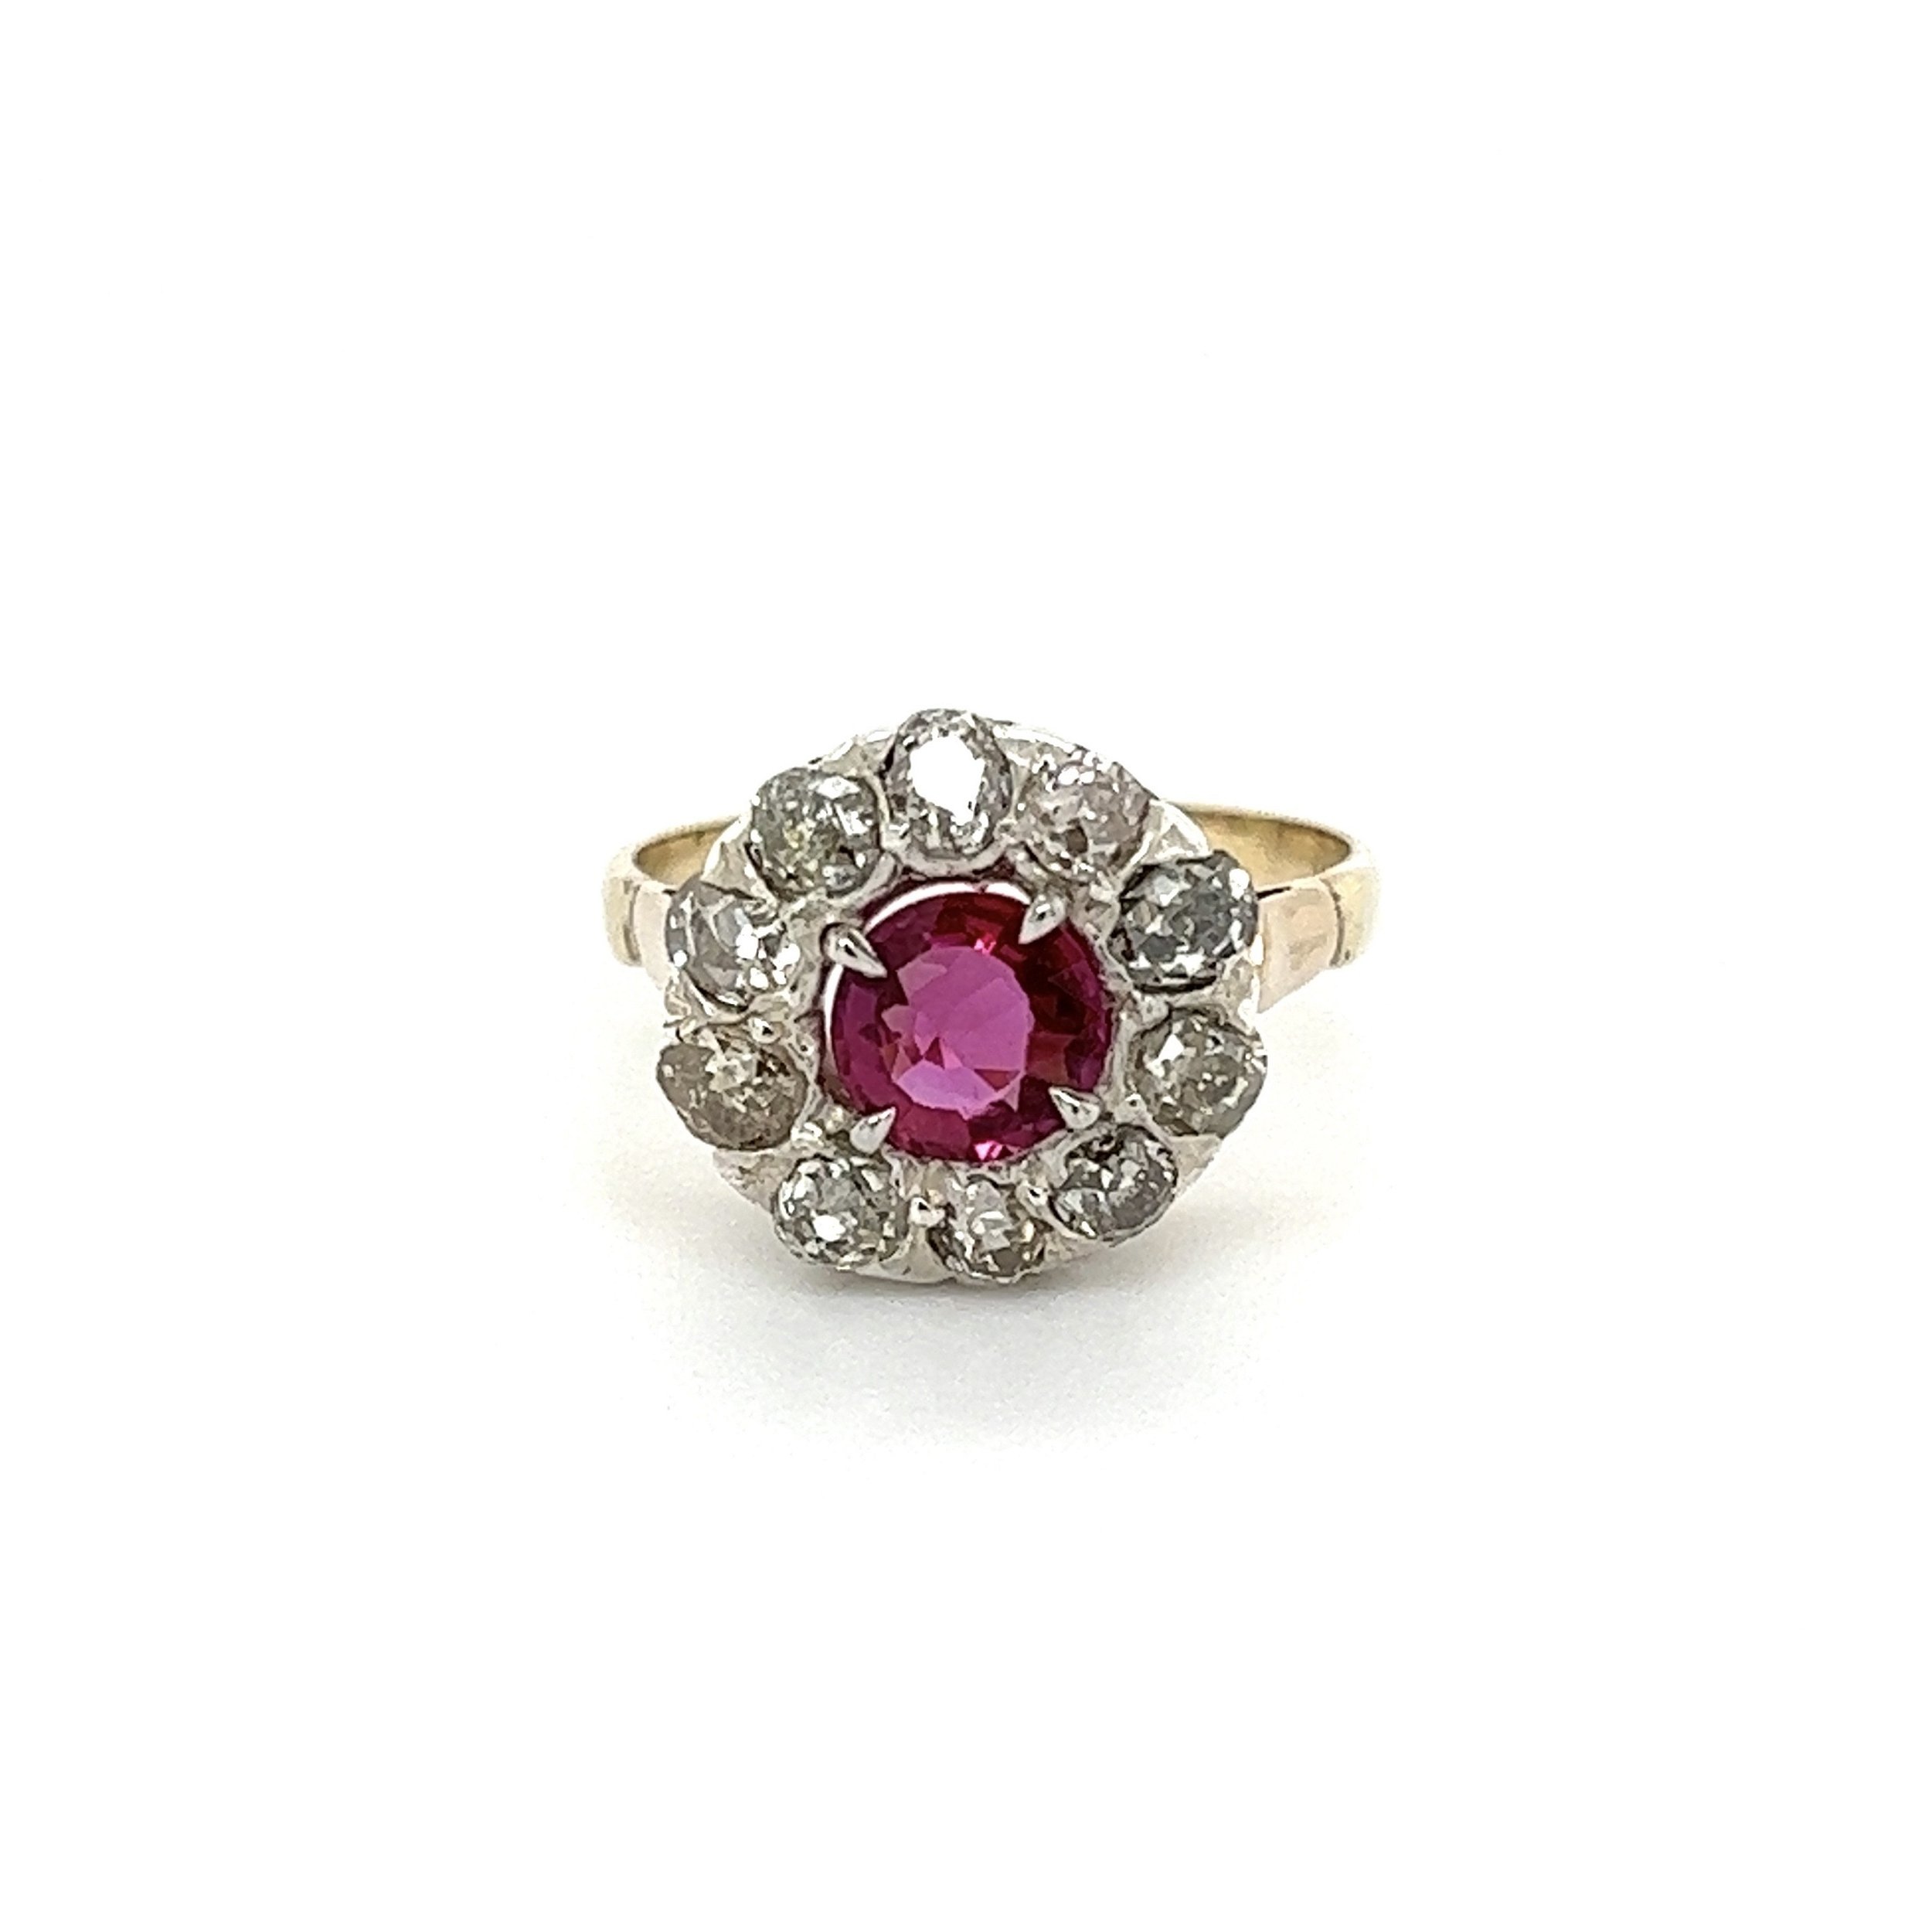 Silver on 14K Victorian .80ct Ruby & 1.00tcw Diamond Halo Ring 3.1g, s6.5